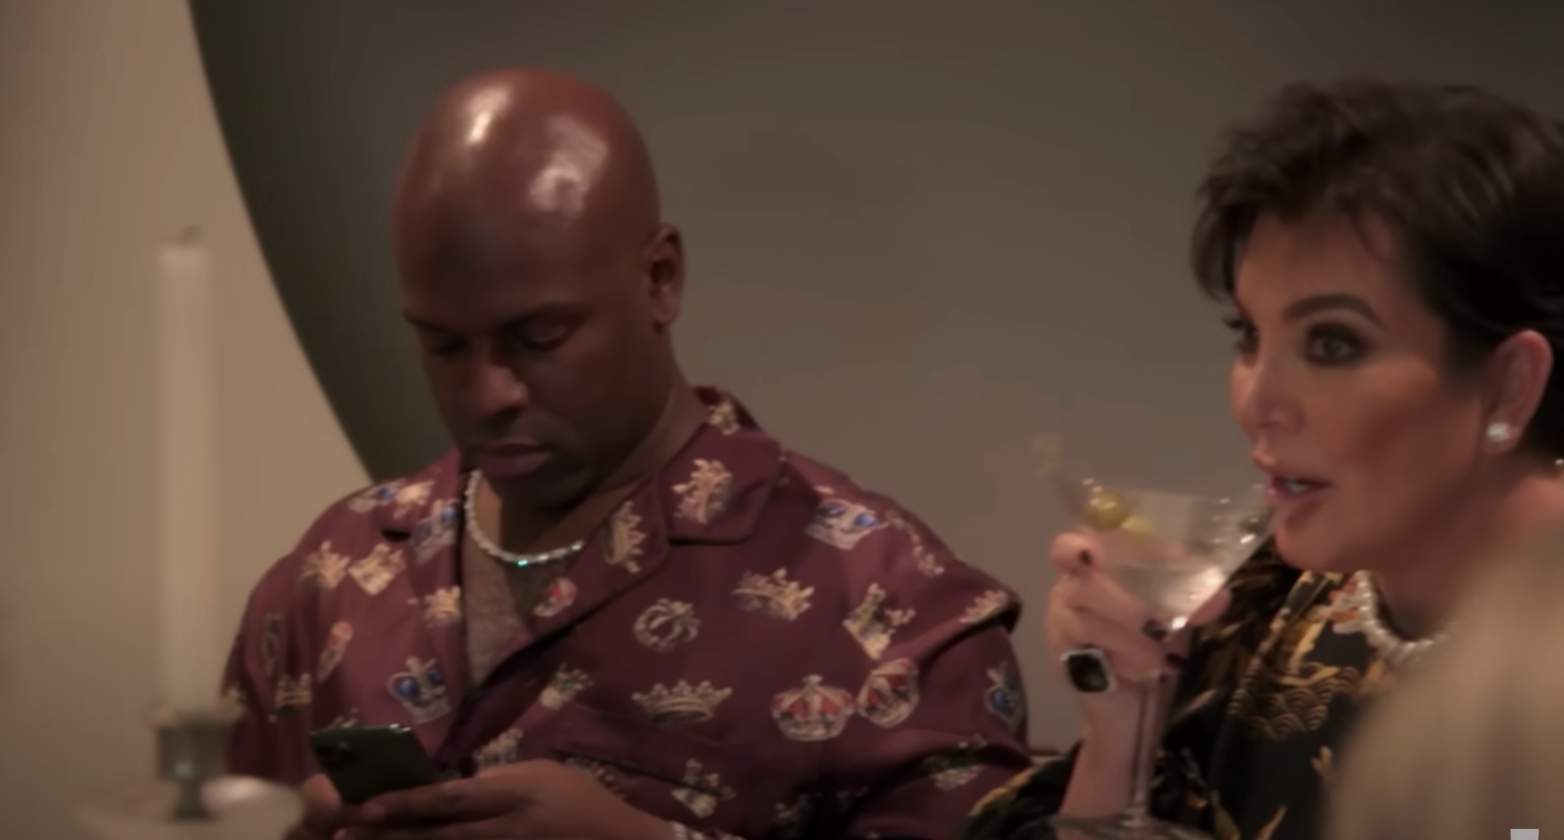 Kris drinking a martini and Corey on his phone